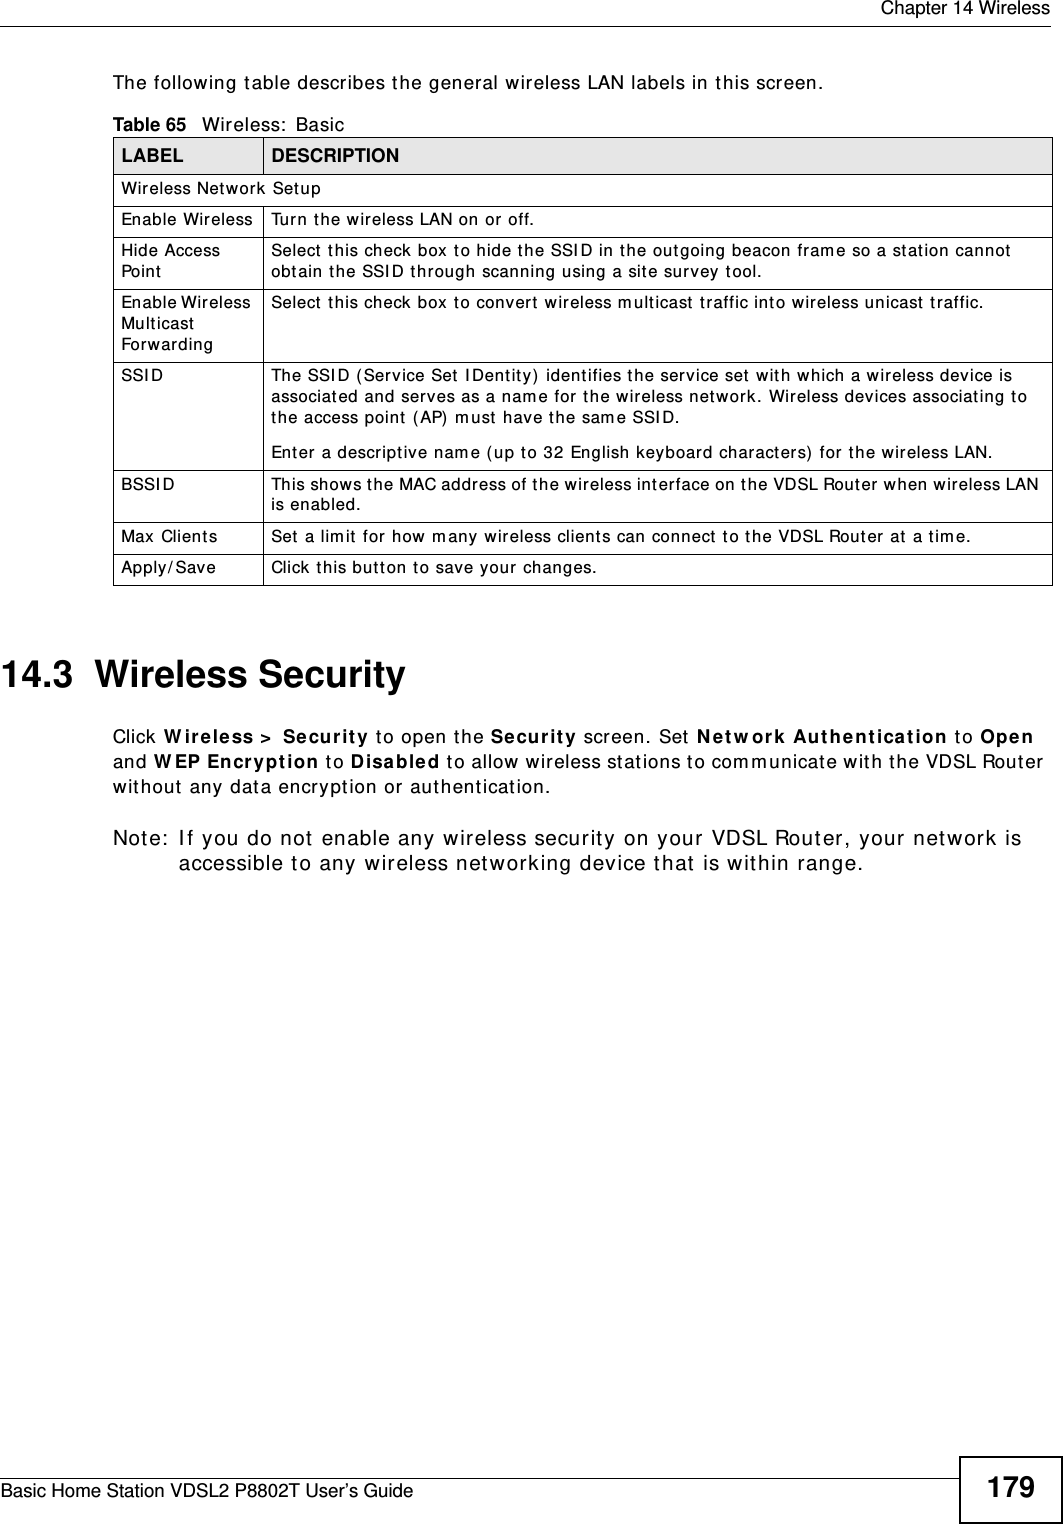  Chapter 14 WirelessBasic Home Station VDSL2 P8802T User’s Guide 179The following table describes t he general wireless LAN labels in t his scr een.14.3  Wireless SecurityClick W ireless &gt;  Securit y t o open the Securit y screen. Set  N et w ork Aut he nt ication t o Ope n and W EP Encr yption  to D isabled t o allow wireless st ations to com m unicate wit h the VDSL Router without any dat a encrypt ion or authenticat ion.Note:  I f you do not  enable any wireless securit y on your VDSL Router, your network is accessible to any wireless net working device t hat is wit hin range.Table 65   Wireless:  BasicLABEL DESCRIPTIONWireless Network SetupEnable Wir eless Turn the wireless LAN on or  off.Hide Access PointSelect  this check box t o hide t he SSI D in t he out going beacon fram e so a st at ion cannot  obtain the SSI D t hr ough scanning using a sit e survey tool.Enable Wireless Mult icast Forwarding Select  t his check box t o convert wireless m ult icast  traffic into wir eless unicast  t raffic.SSI D The SSI D ( Service Set  IDent it y) identifies the service set wit h which a wireless device is associated and serves as a nam e for the wireless net work. Wireless devices associat ing to t he access point ( AP)  m ust  have t he sam e SSI D. Enter a descript ive nam e ( up to 32 English keyboard characters)  for t he wireless LAN. BSSI D This show s the MAC address of the wireless int erface on the VDSL Rout er when wireless LAN is enabled.Max Clients Set  a lim it for  how m any wireless client s can connect  to the VDSL Rout er at a t im e.Apply/ Save Click t his but t on to save your changes.